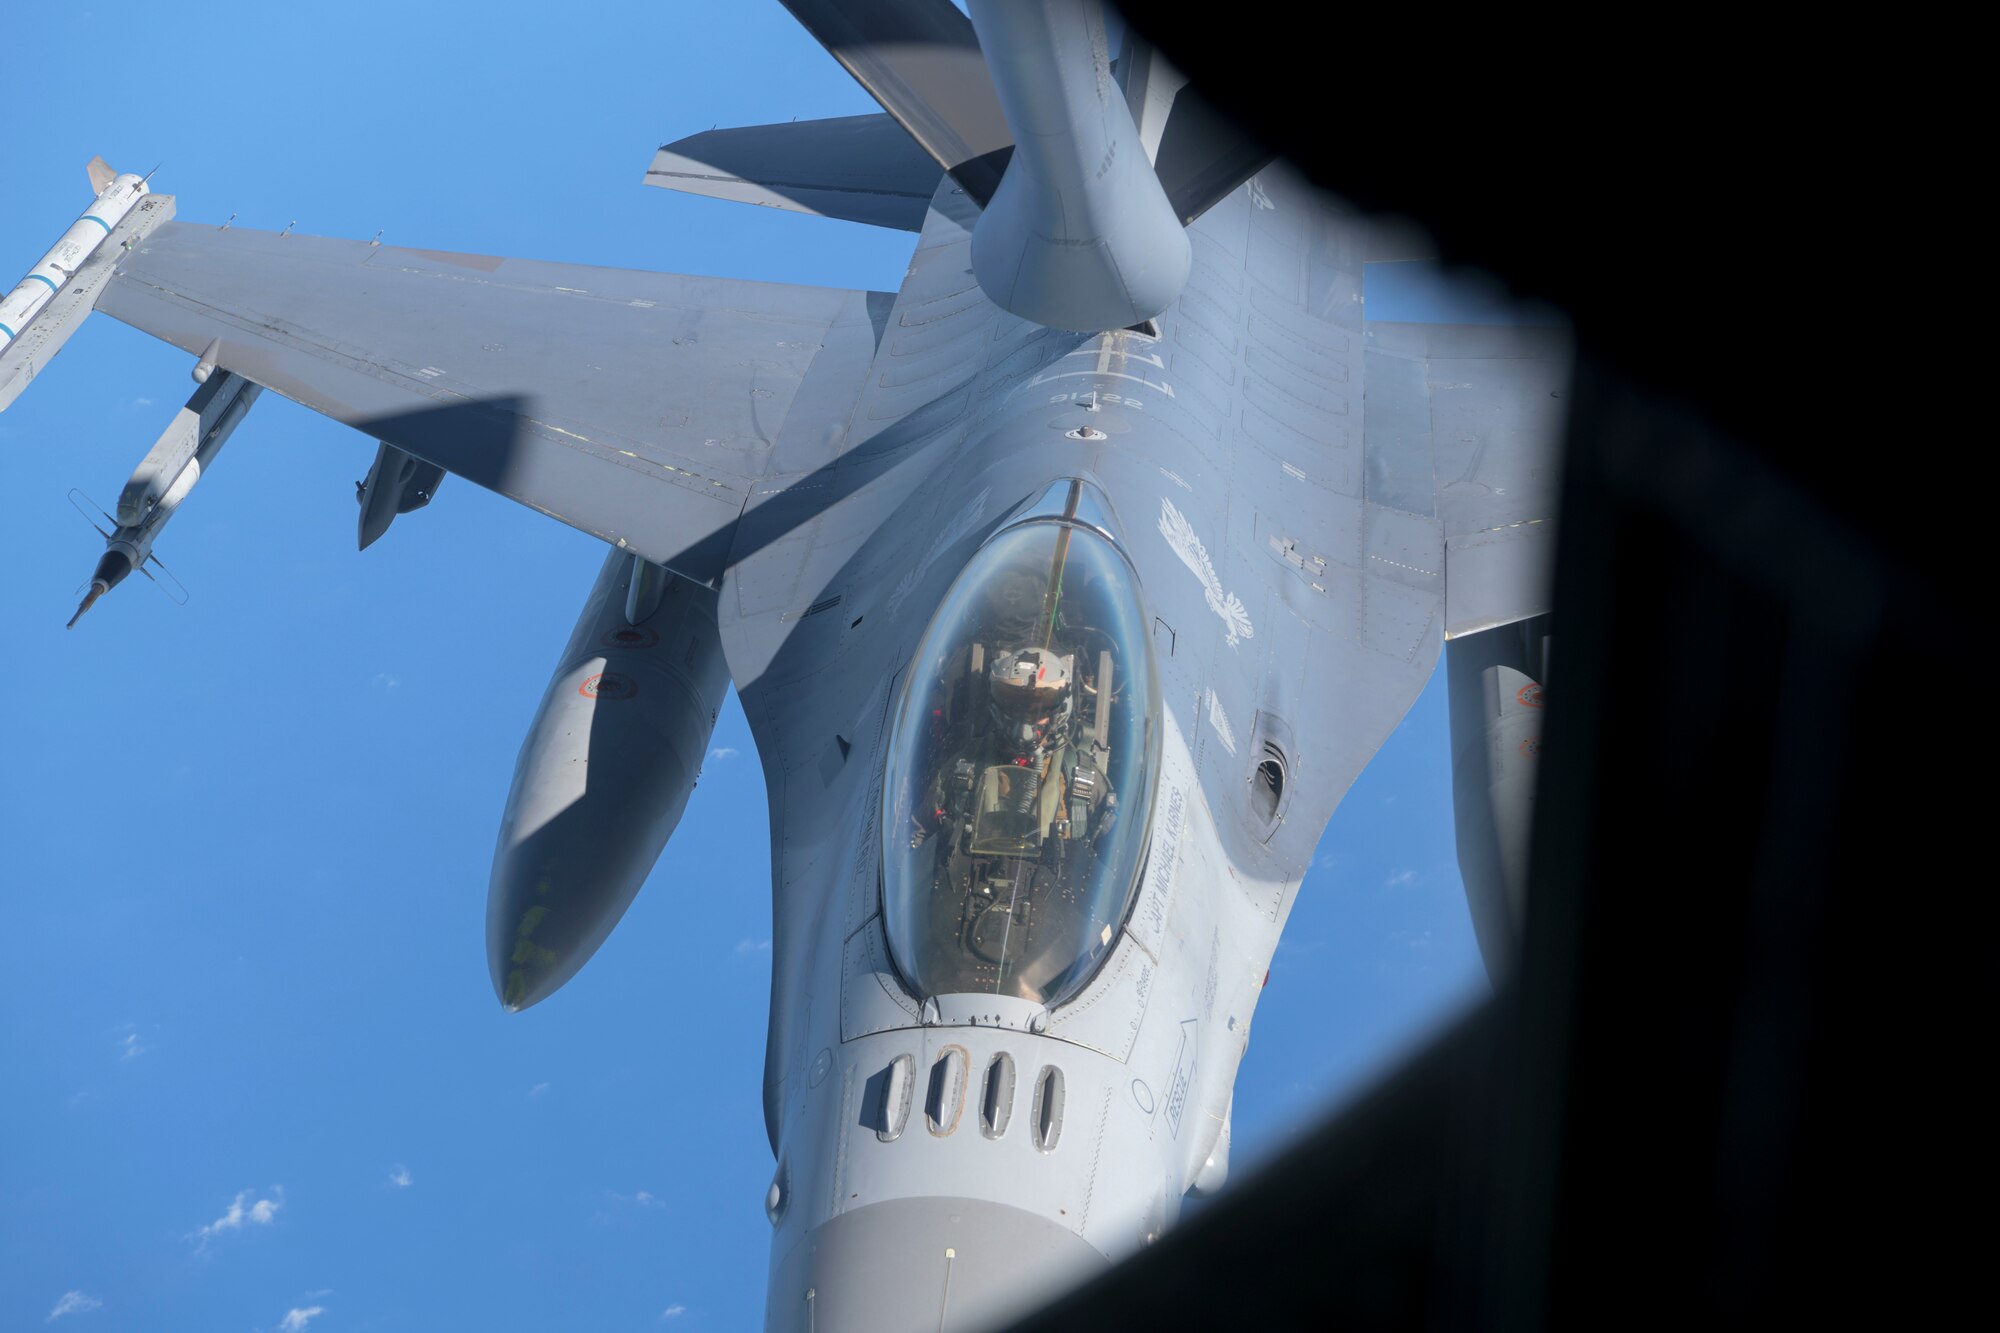 U.S. Air Force F-16 Fighting Falcon from the 35th Fighter Wing, Misawa Air Base, Japan, is being refueled by a KC-135 Stratotanker from the 909th Air Refueling Squadron during the second iteration of Exercise WestPac Rumrunner, July 31, 2020, at Kadena Air Base, Japan. The National Defense Strategy (NDS) directs the U.S. military to be more lethal, improve relationships with allies and partners, and encourage institutional reform; the 18th Wing supports the NDS by developing and continuing new training exercises like WestPac Rumrunner.